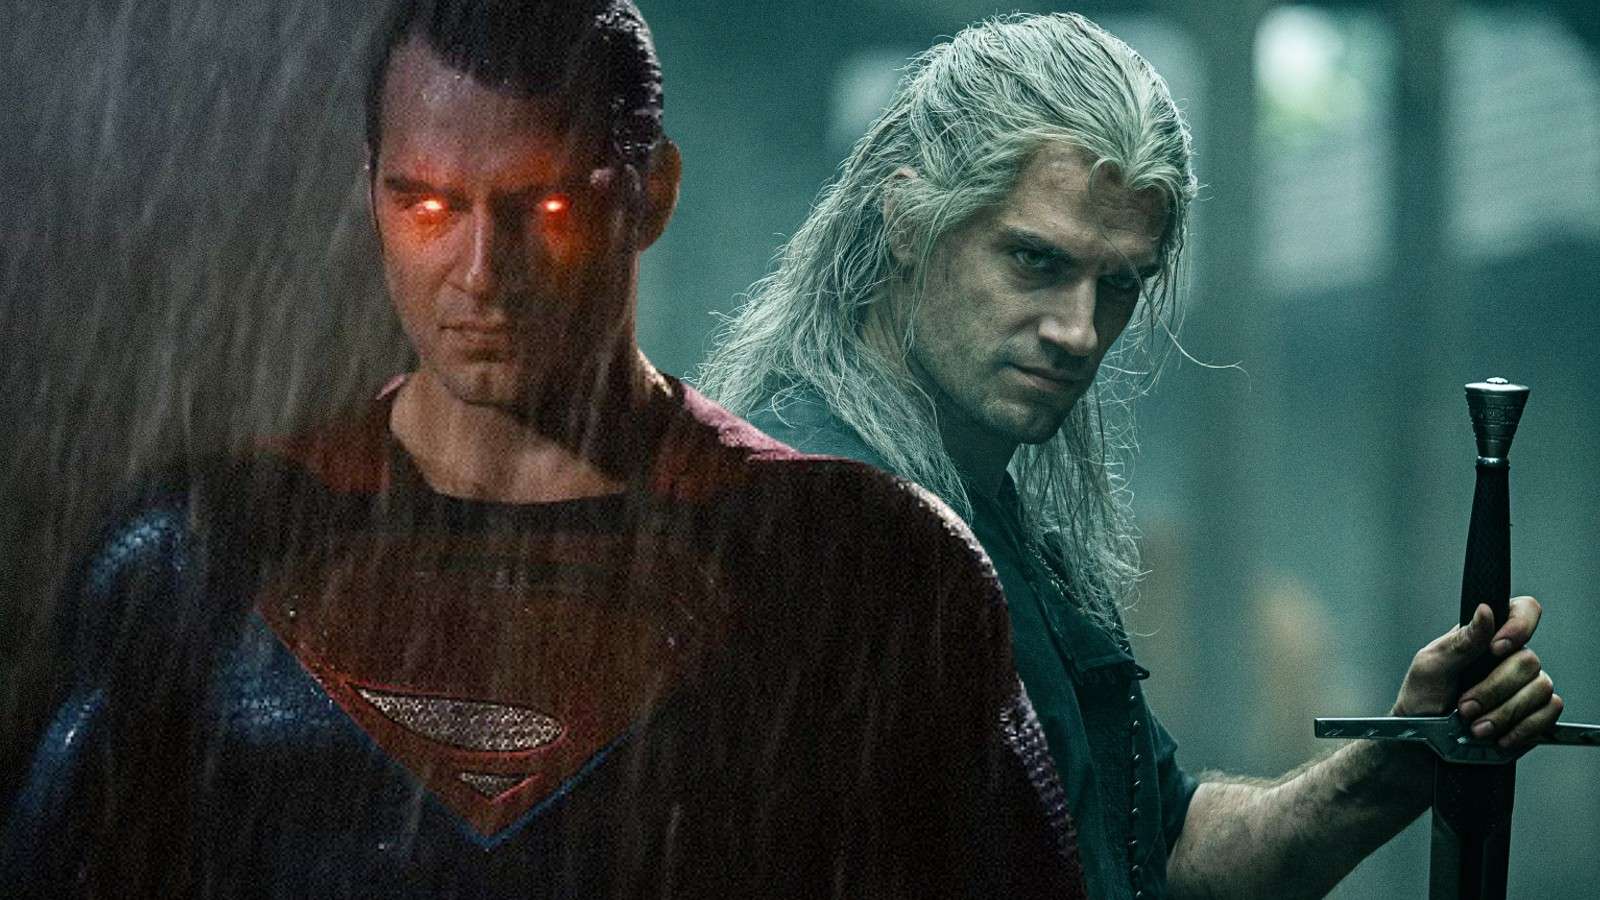 Henry Cavill as Superman and Geralt of Rivia in The Witcher